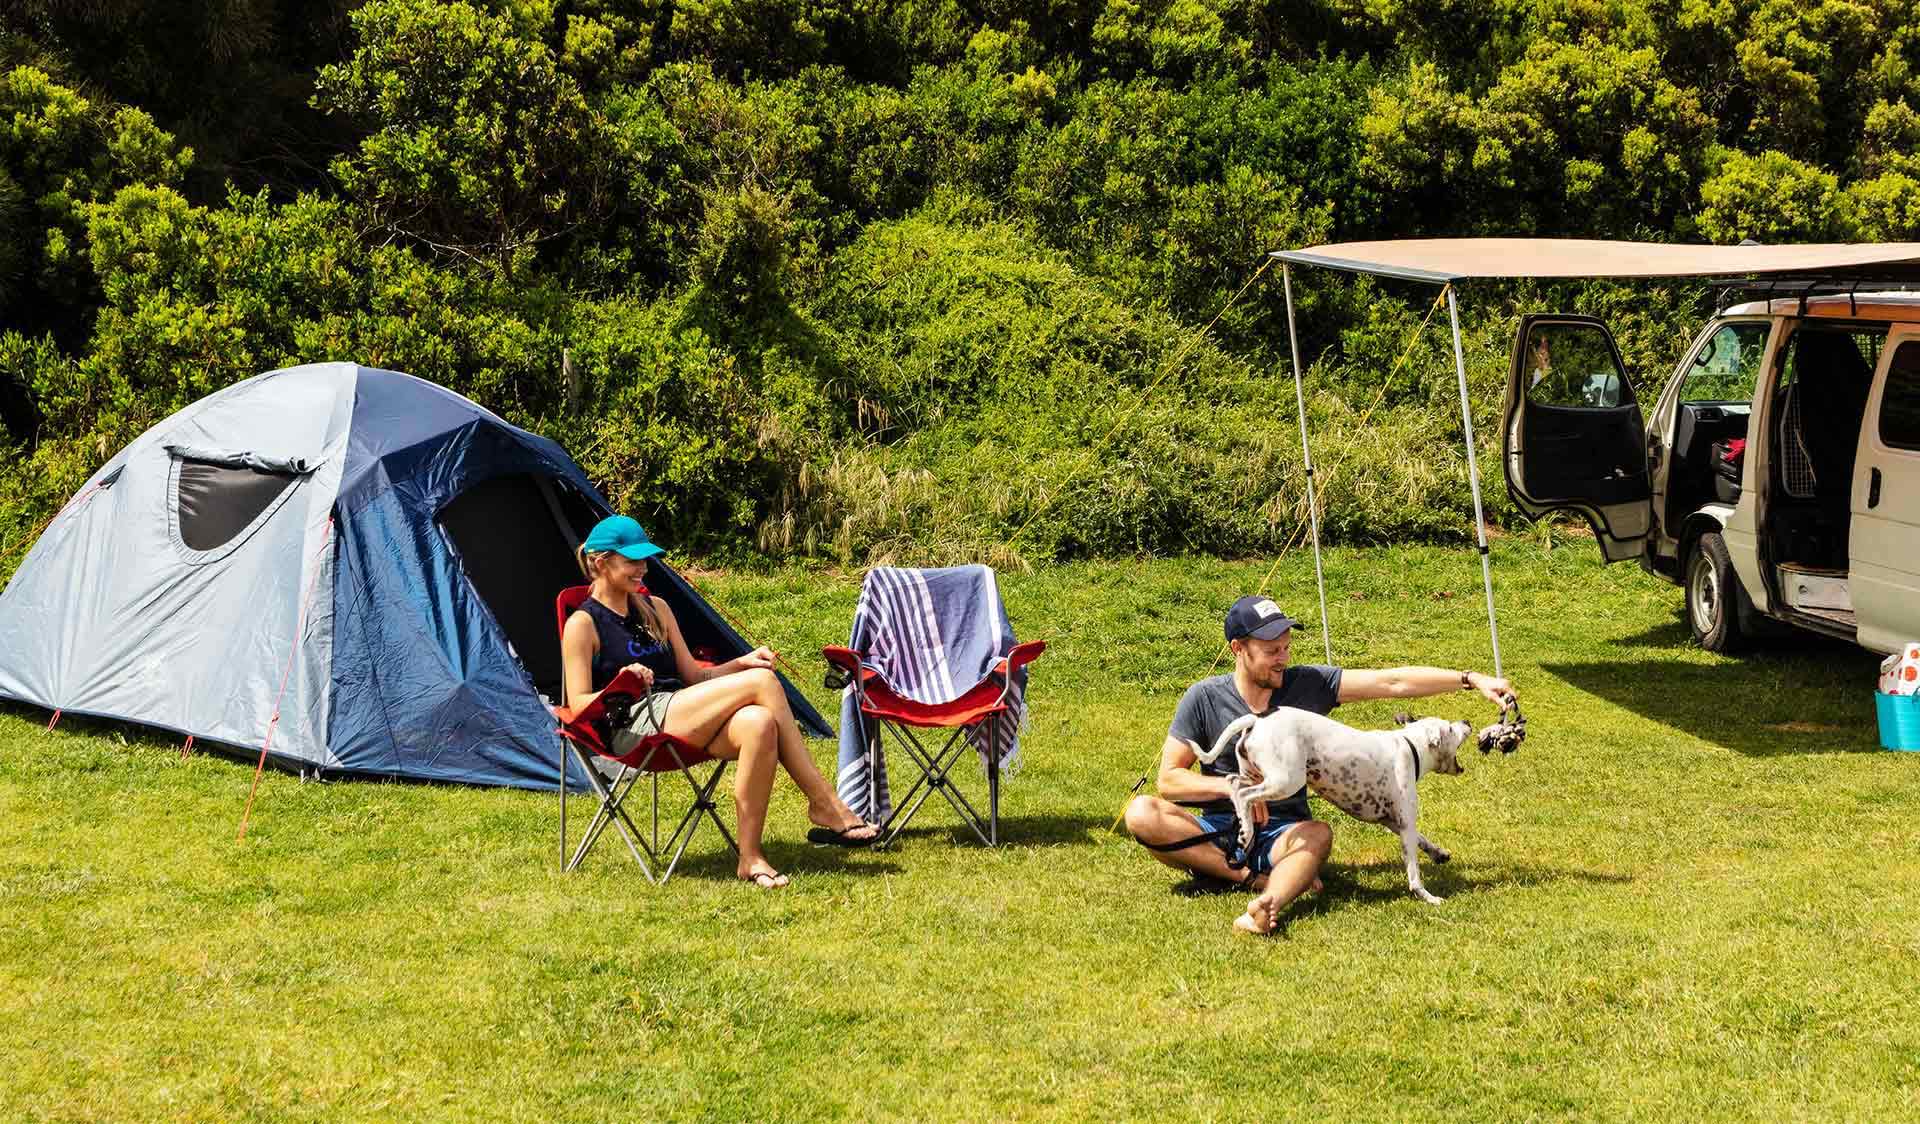 A couple in their thirties play with their dog at Johanna Beach Campground next to their tent and campervan.